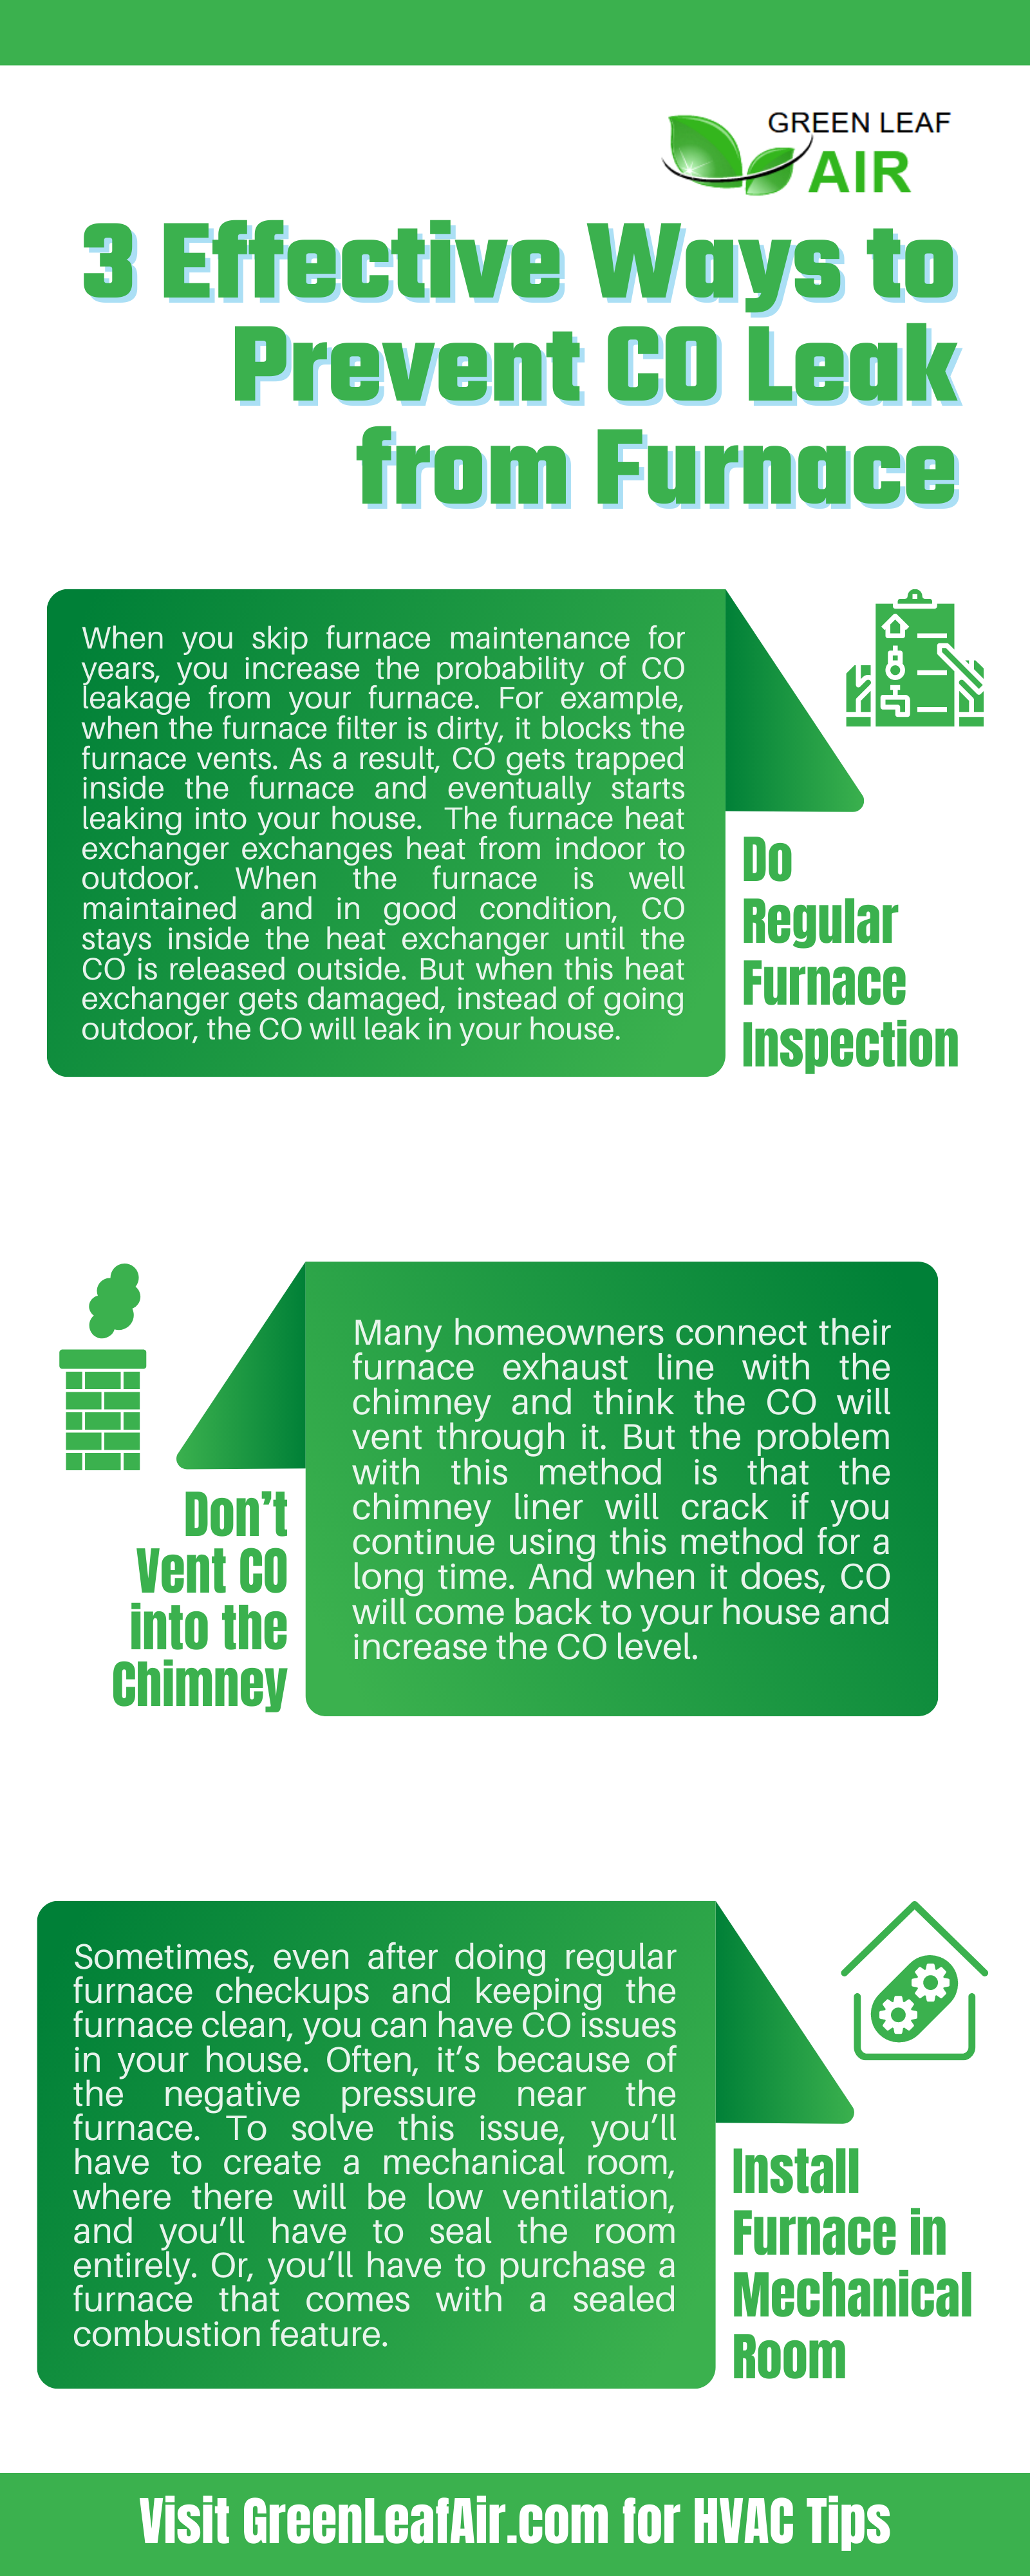 3 Effective Ways to Prevent CO Leak from the Furnace